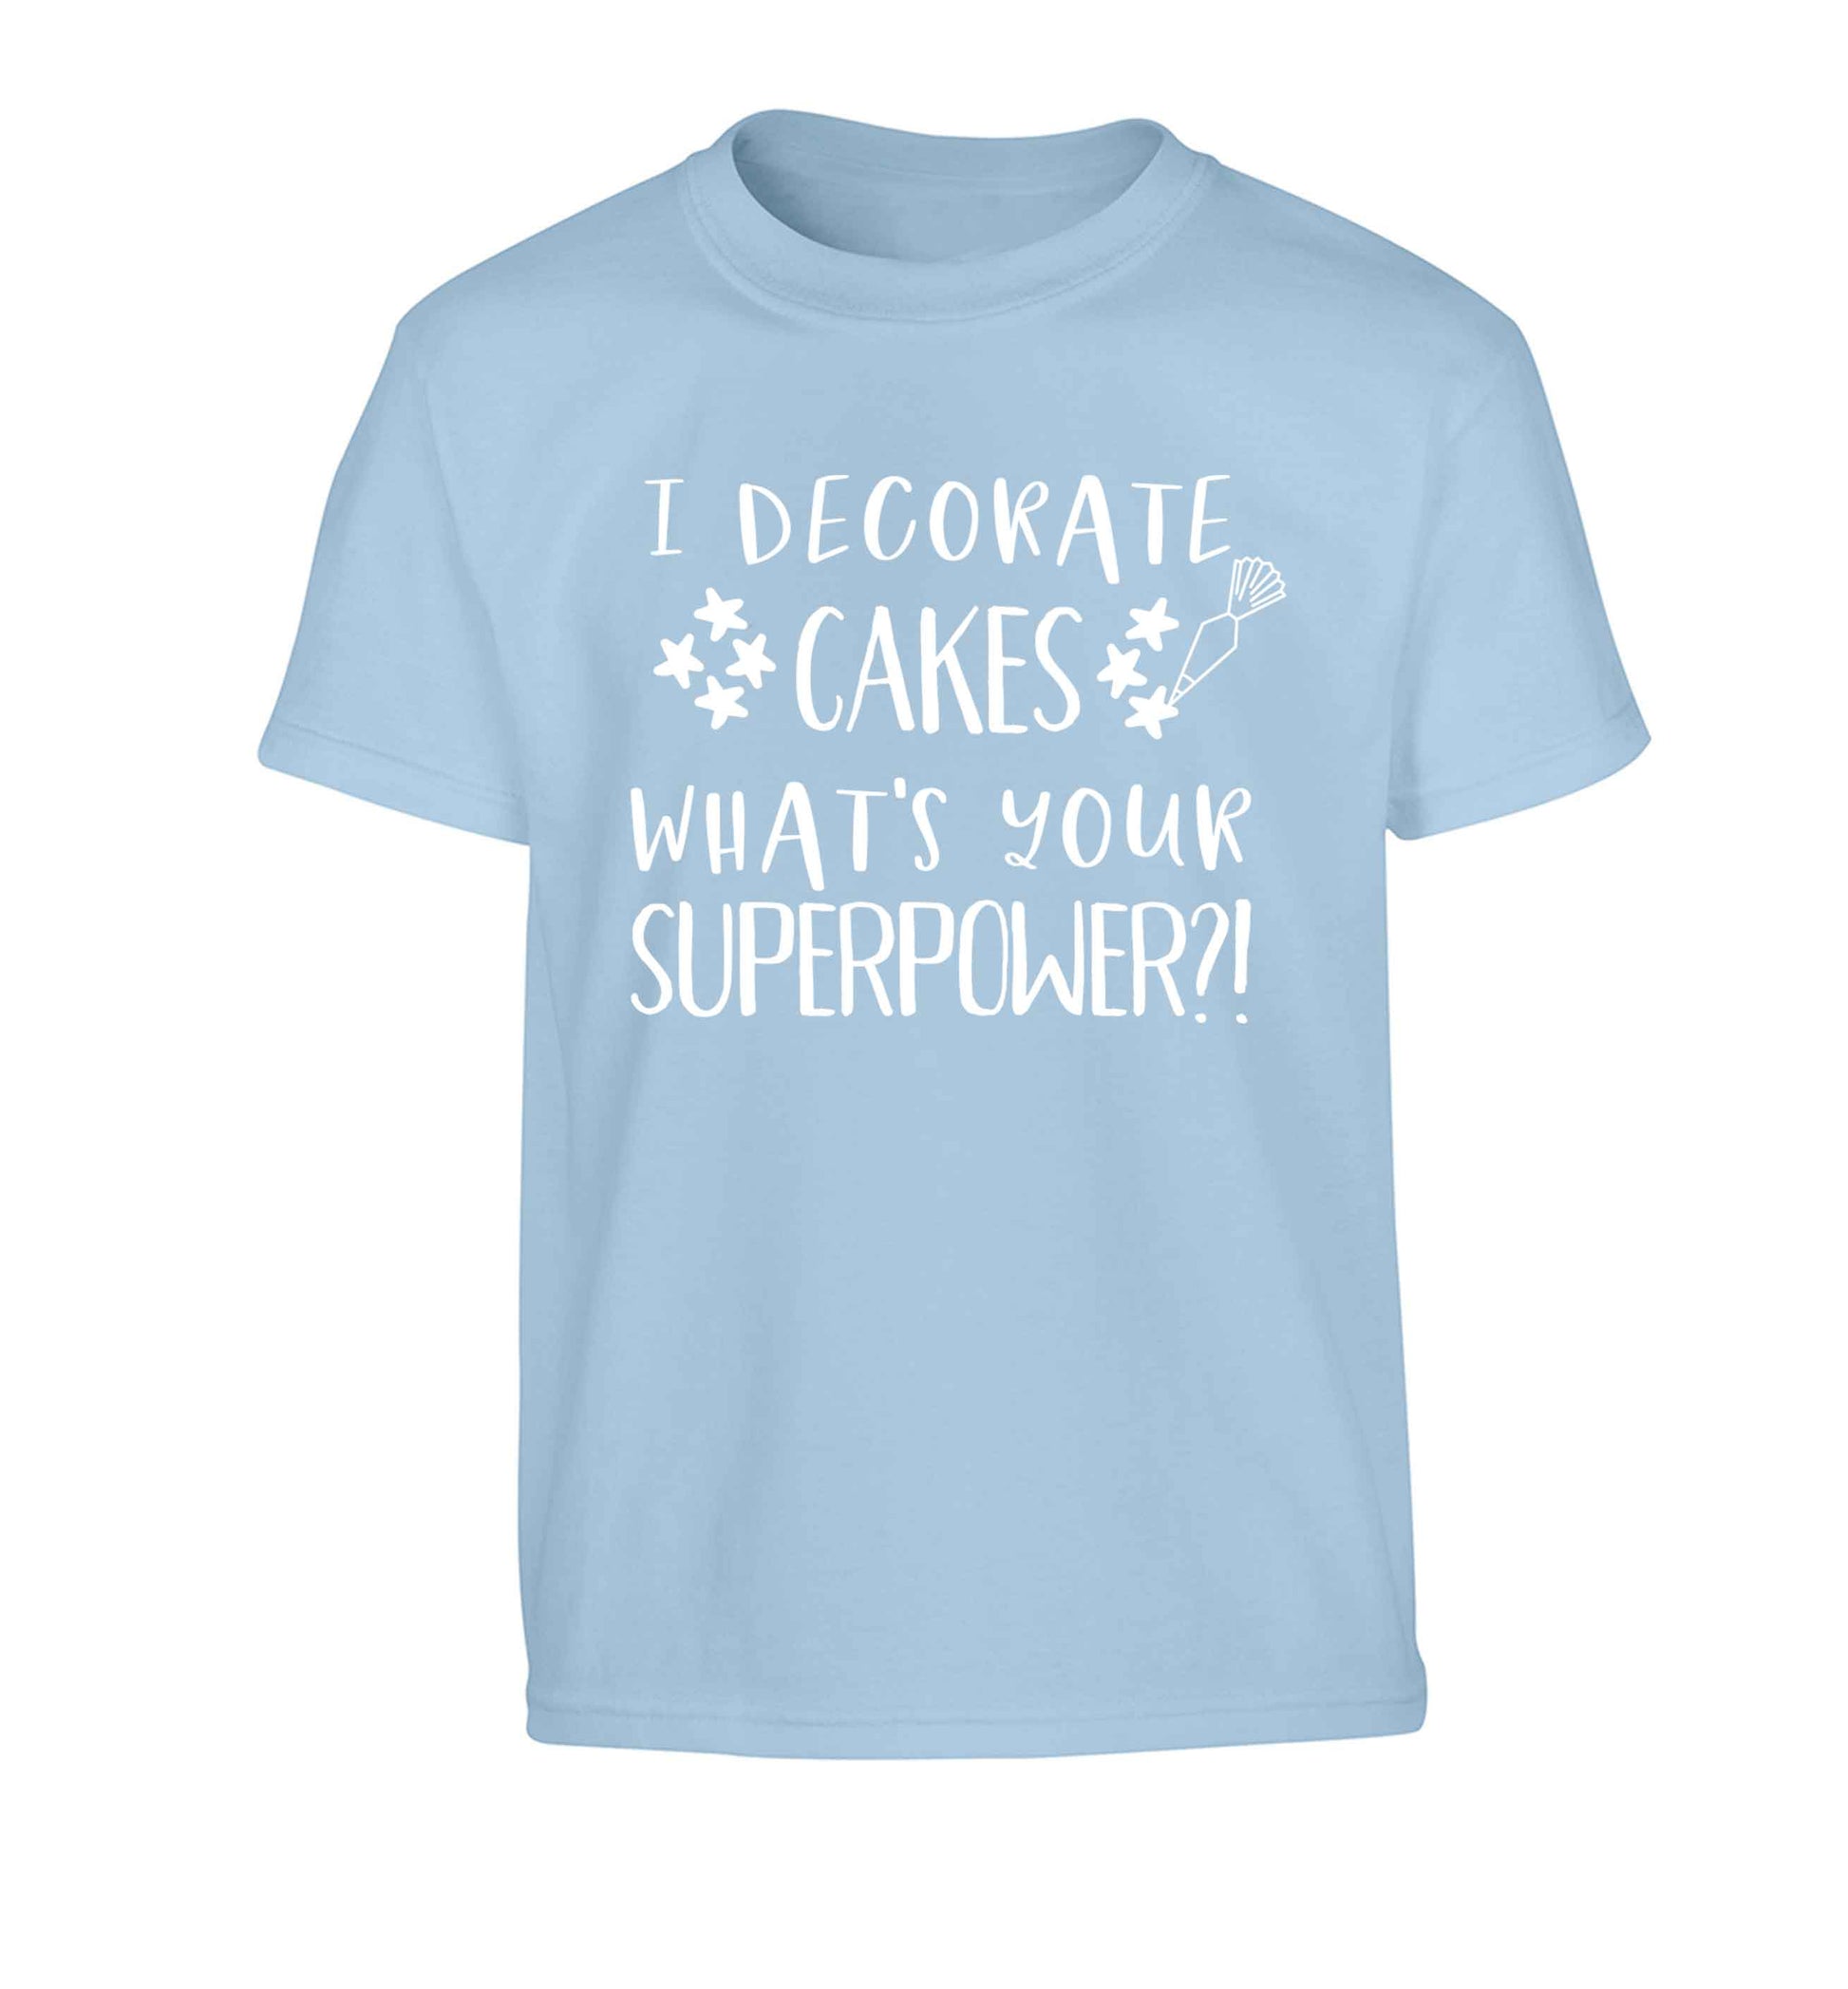 I decorate cakes what's your superpower?! Children's light blue Tshirt 12-13 Years